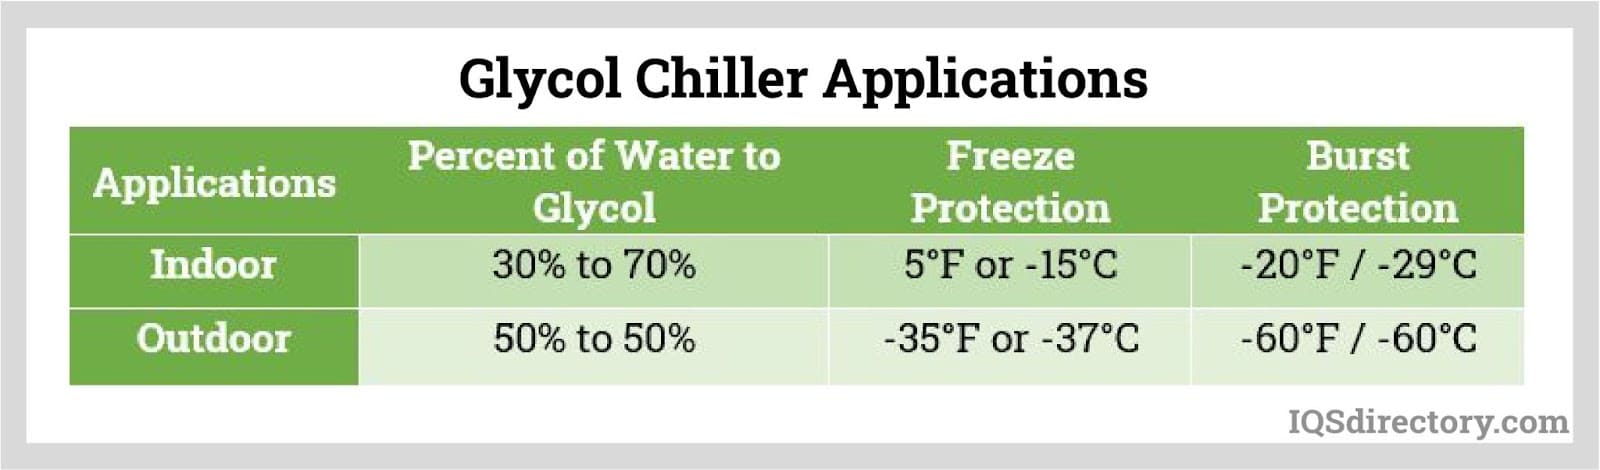 Glycol Chiller Applications